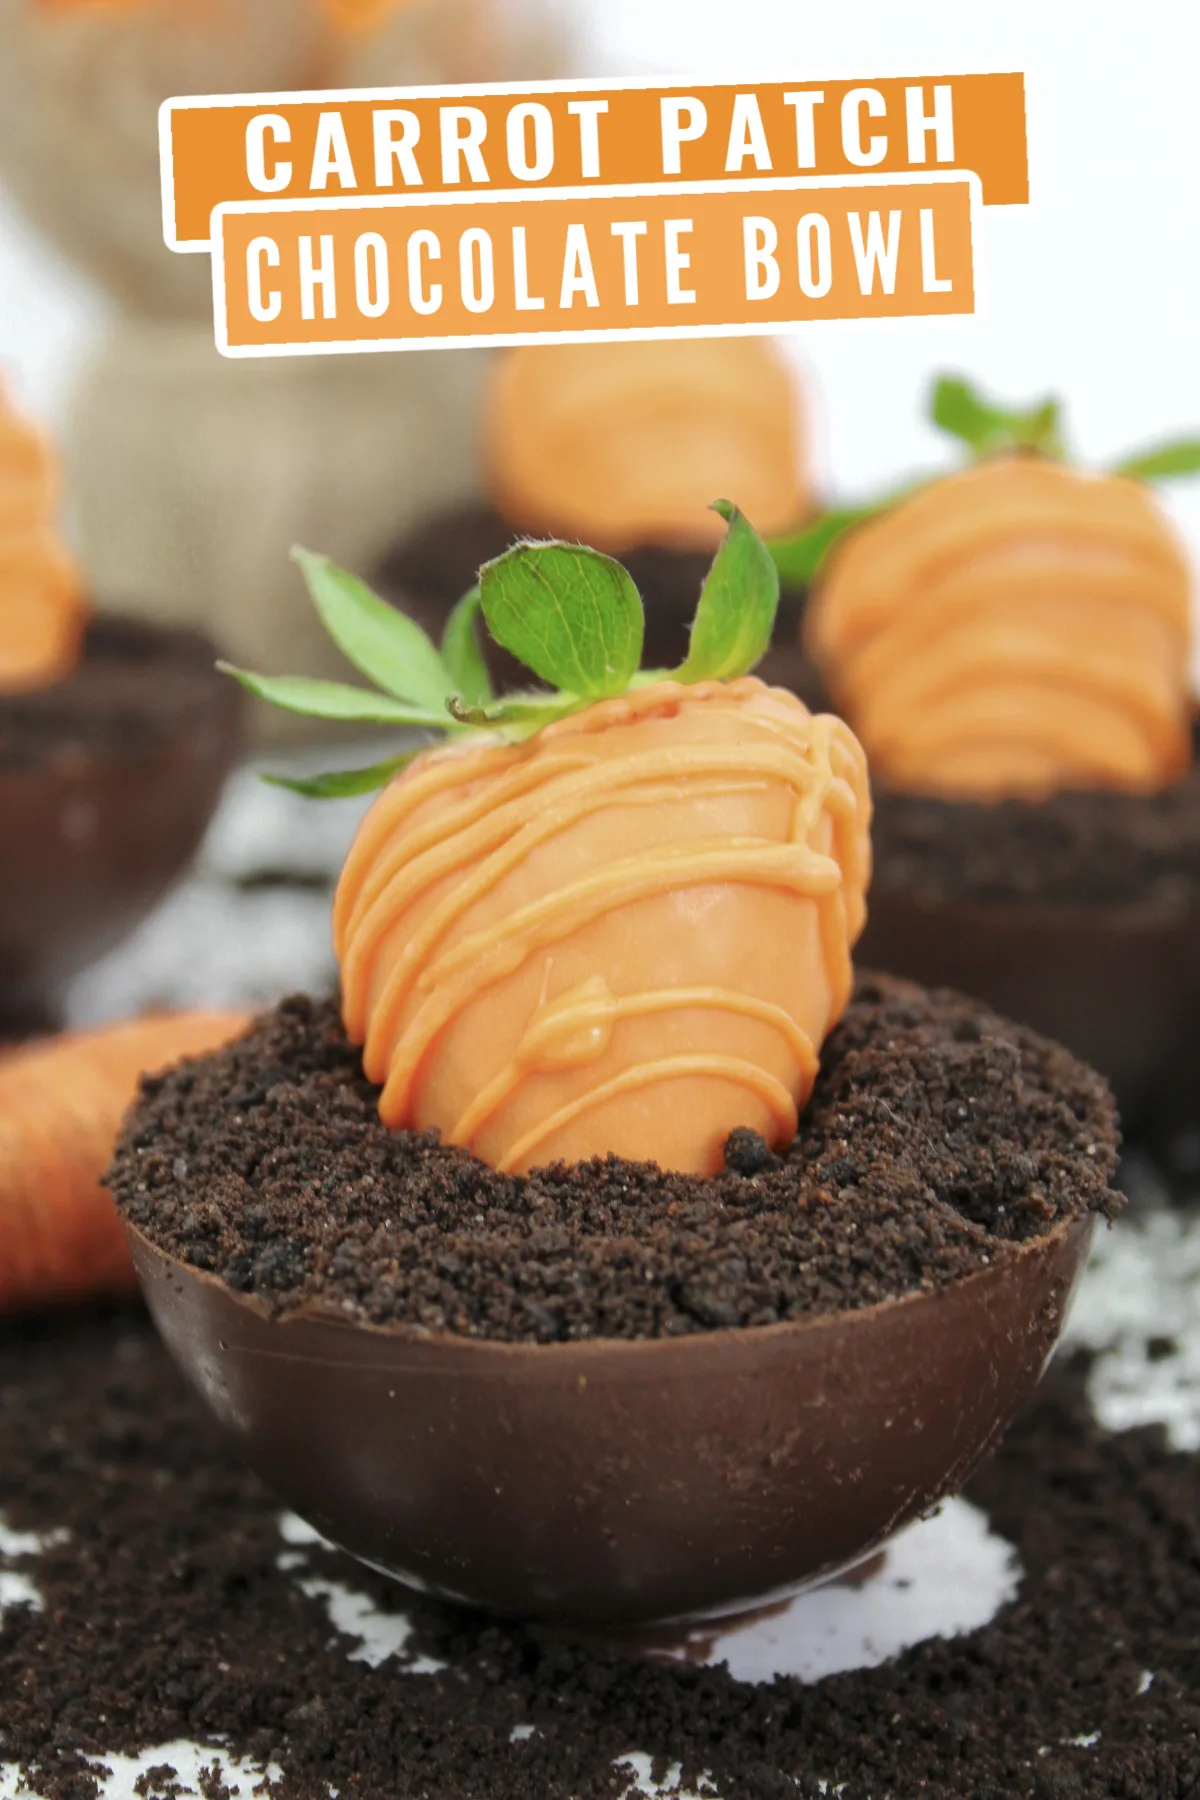 Make Easter extra special with Carrot Patch Chocolate Bowls, made with Brownie pieces, chocolate ganache, and a chocolate dipped strawberry.